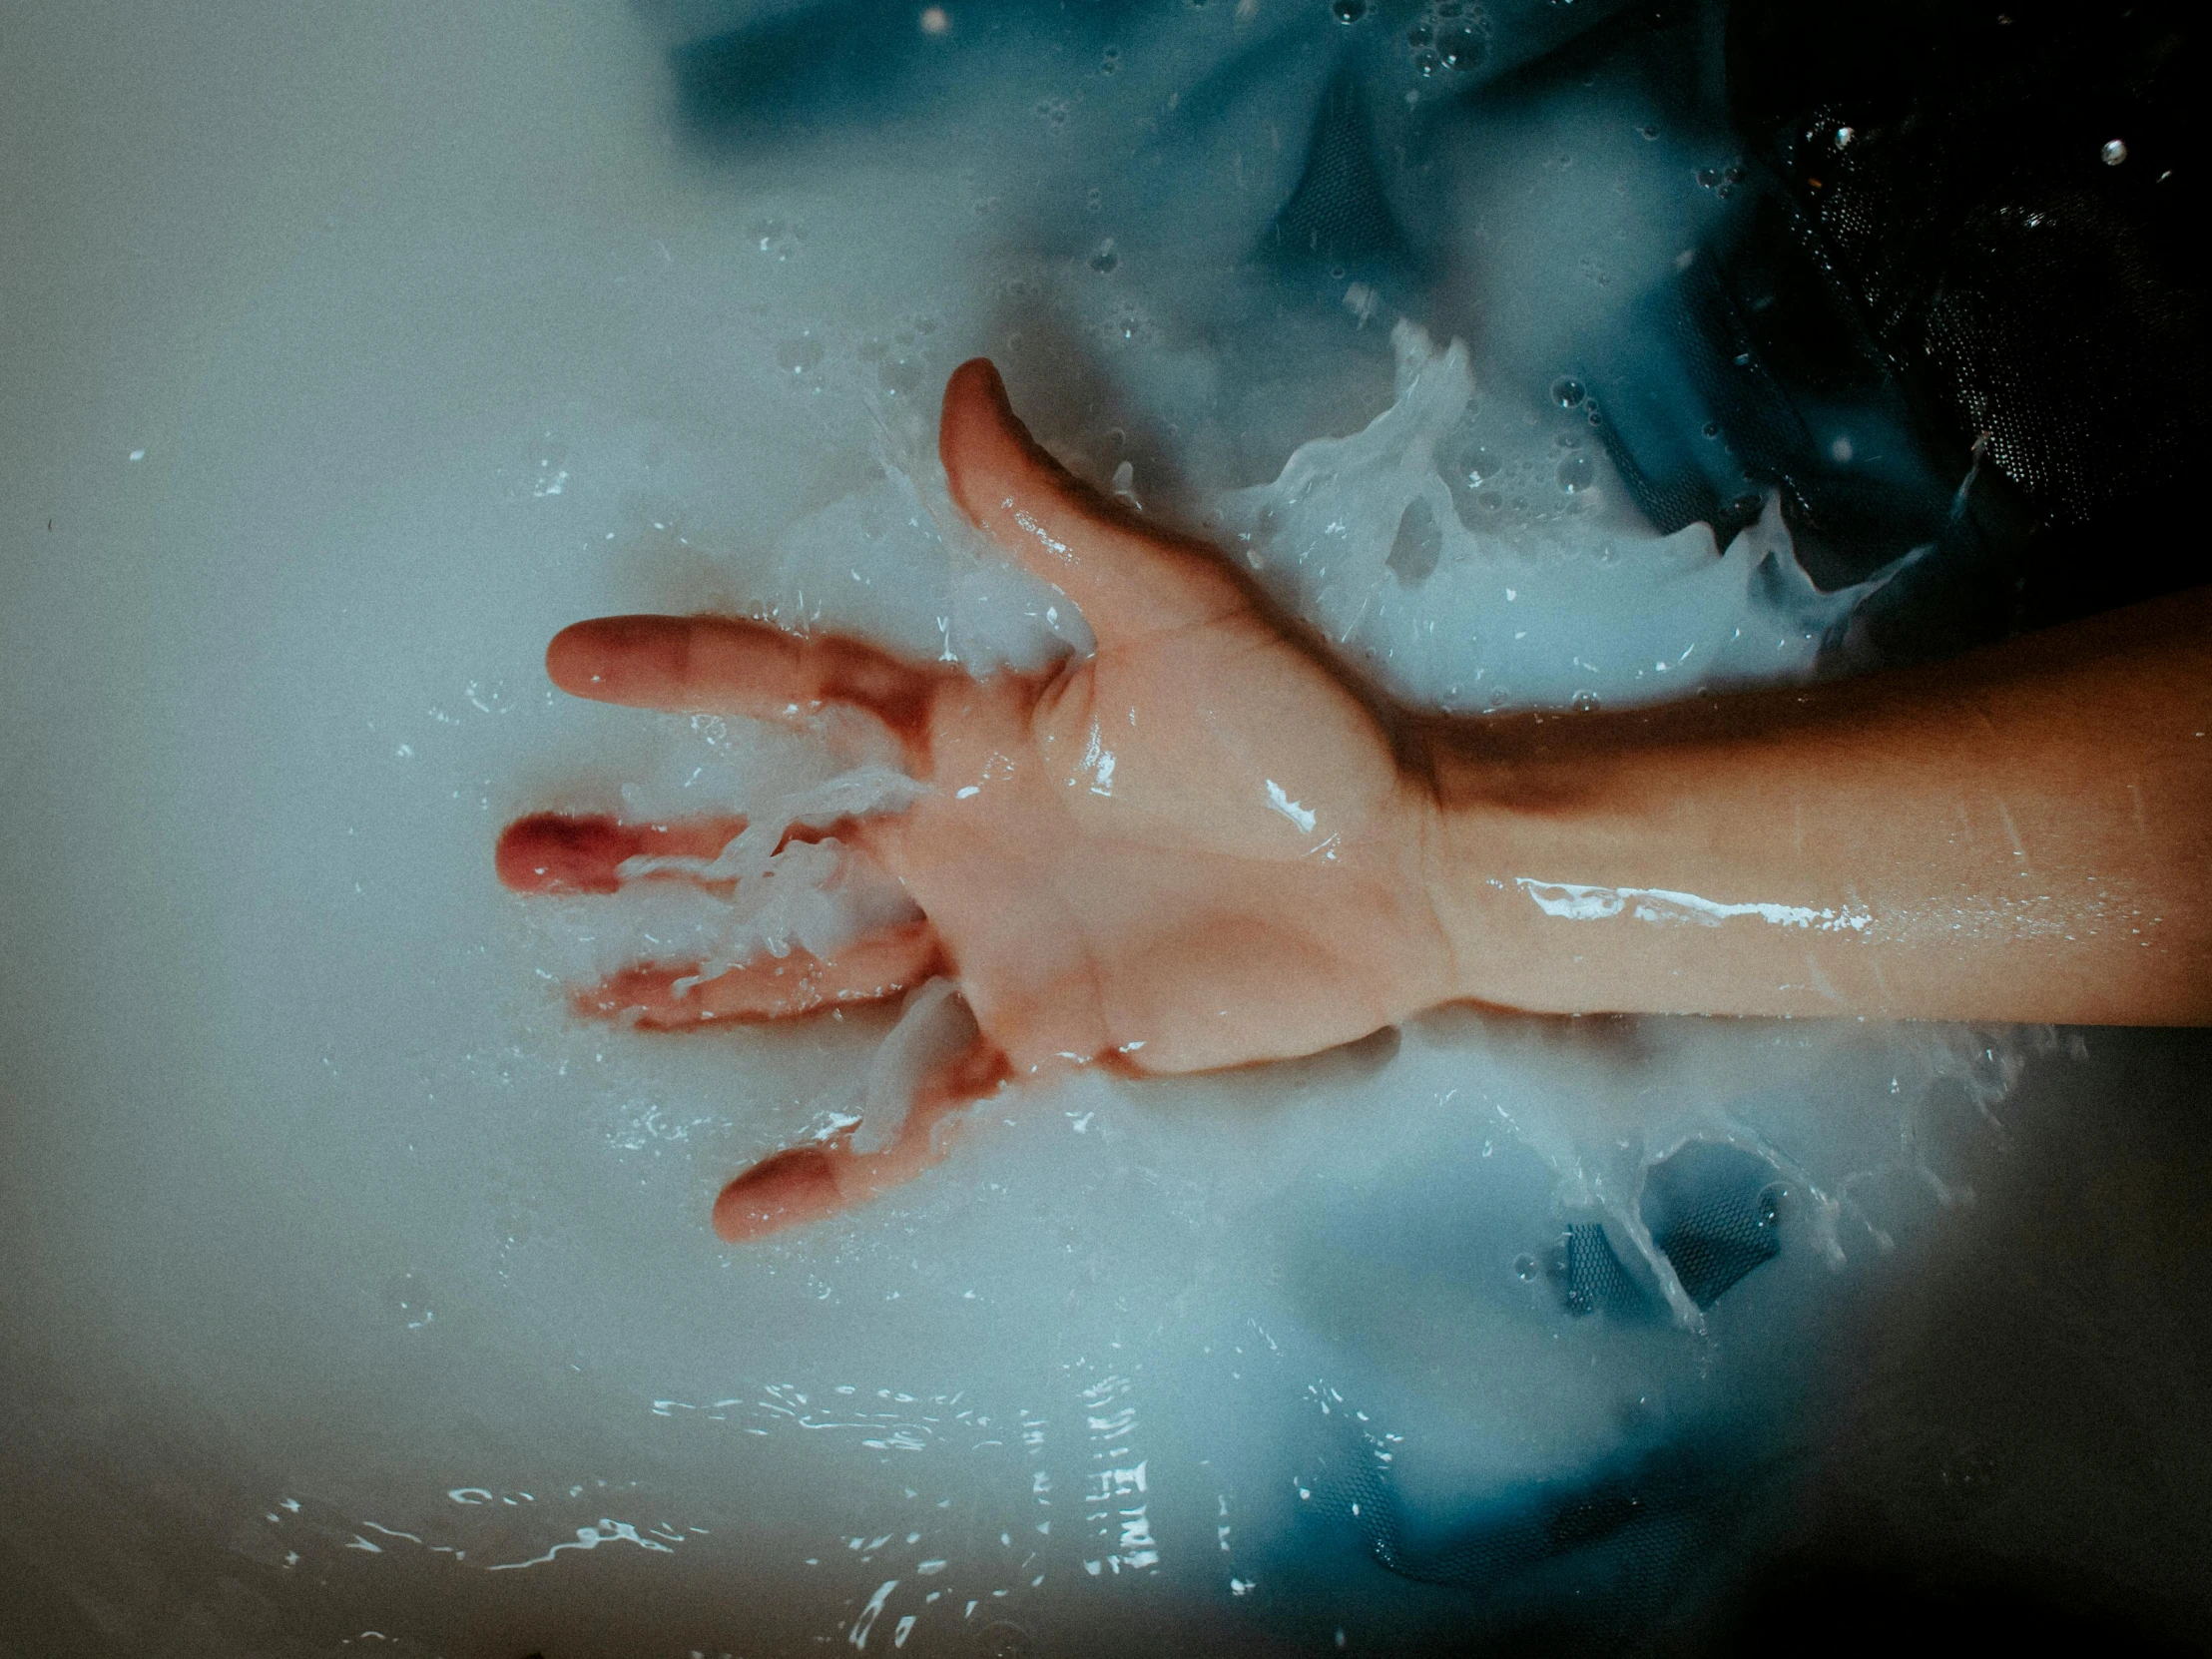 a close up of a person's hand in a bathtub, inspired by Elsa Bleda, pexels, process art, realistic jelly splashes, ectoplasm, ilustration, shrugging arms